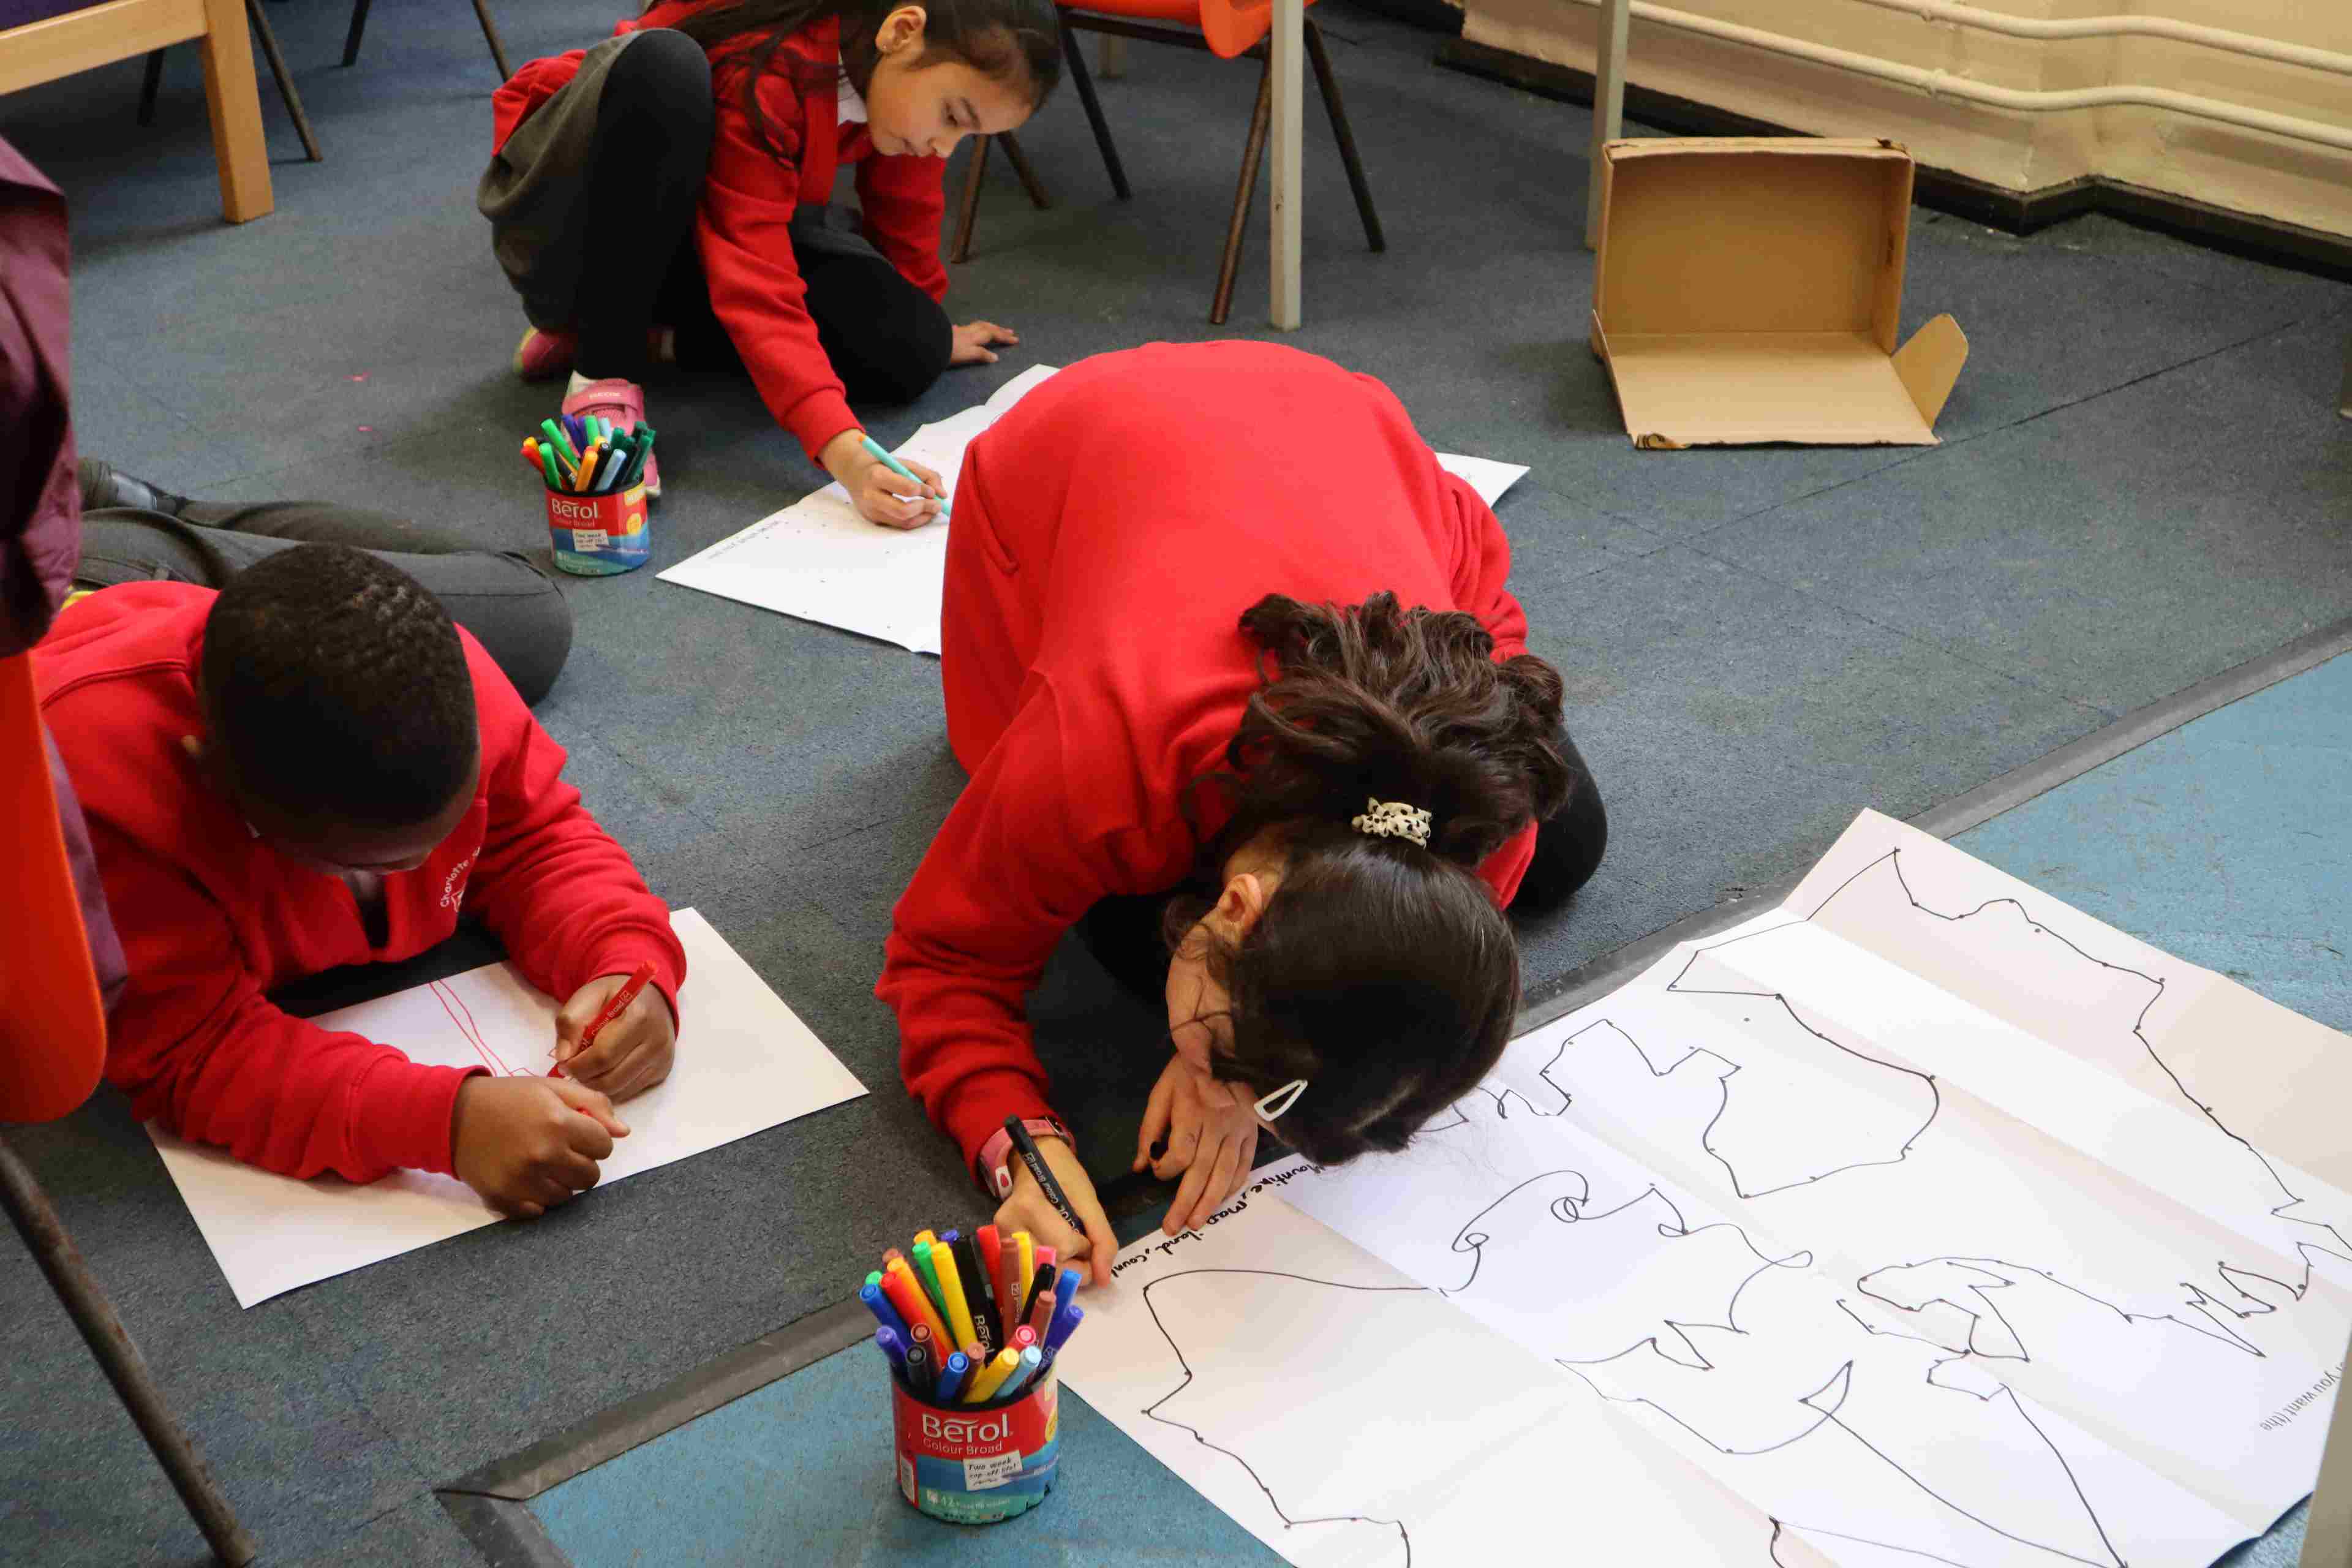 Primary school children wearing red sweatshirts  sitting on the floor colouring in pieces of paper.